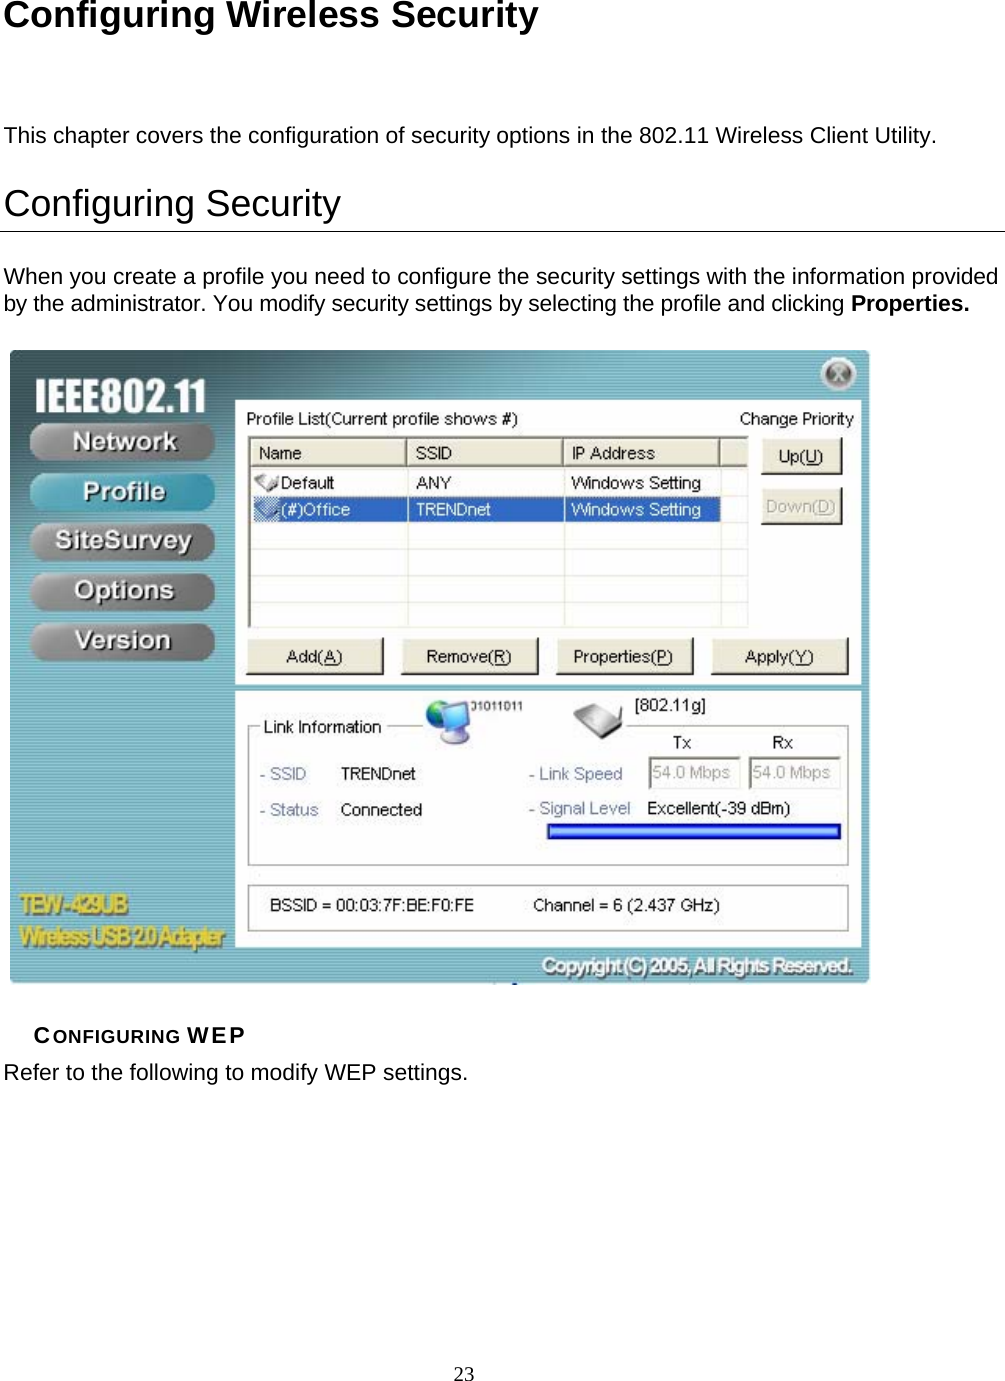       23 Configuring Wireless Security This chapter covers the configuration of security options in the 802.11 Wireless Client Utility. Configuring Security When you create a profile you need to configure the security settings with the information provided by the administrator. You modify security settings by selecting the profile and clicking Properties.  CONFIGURING WEP Refer to the following to modify WEP settings. 